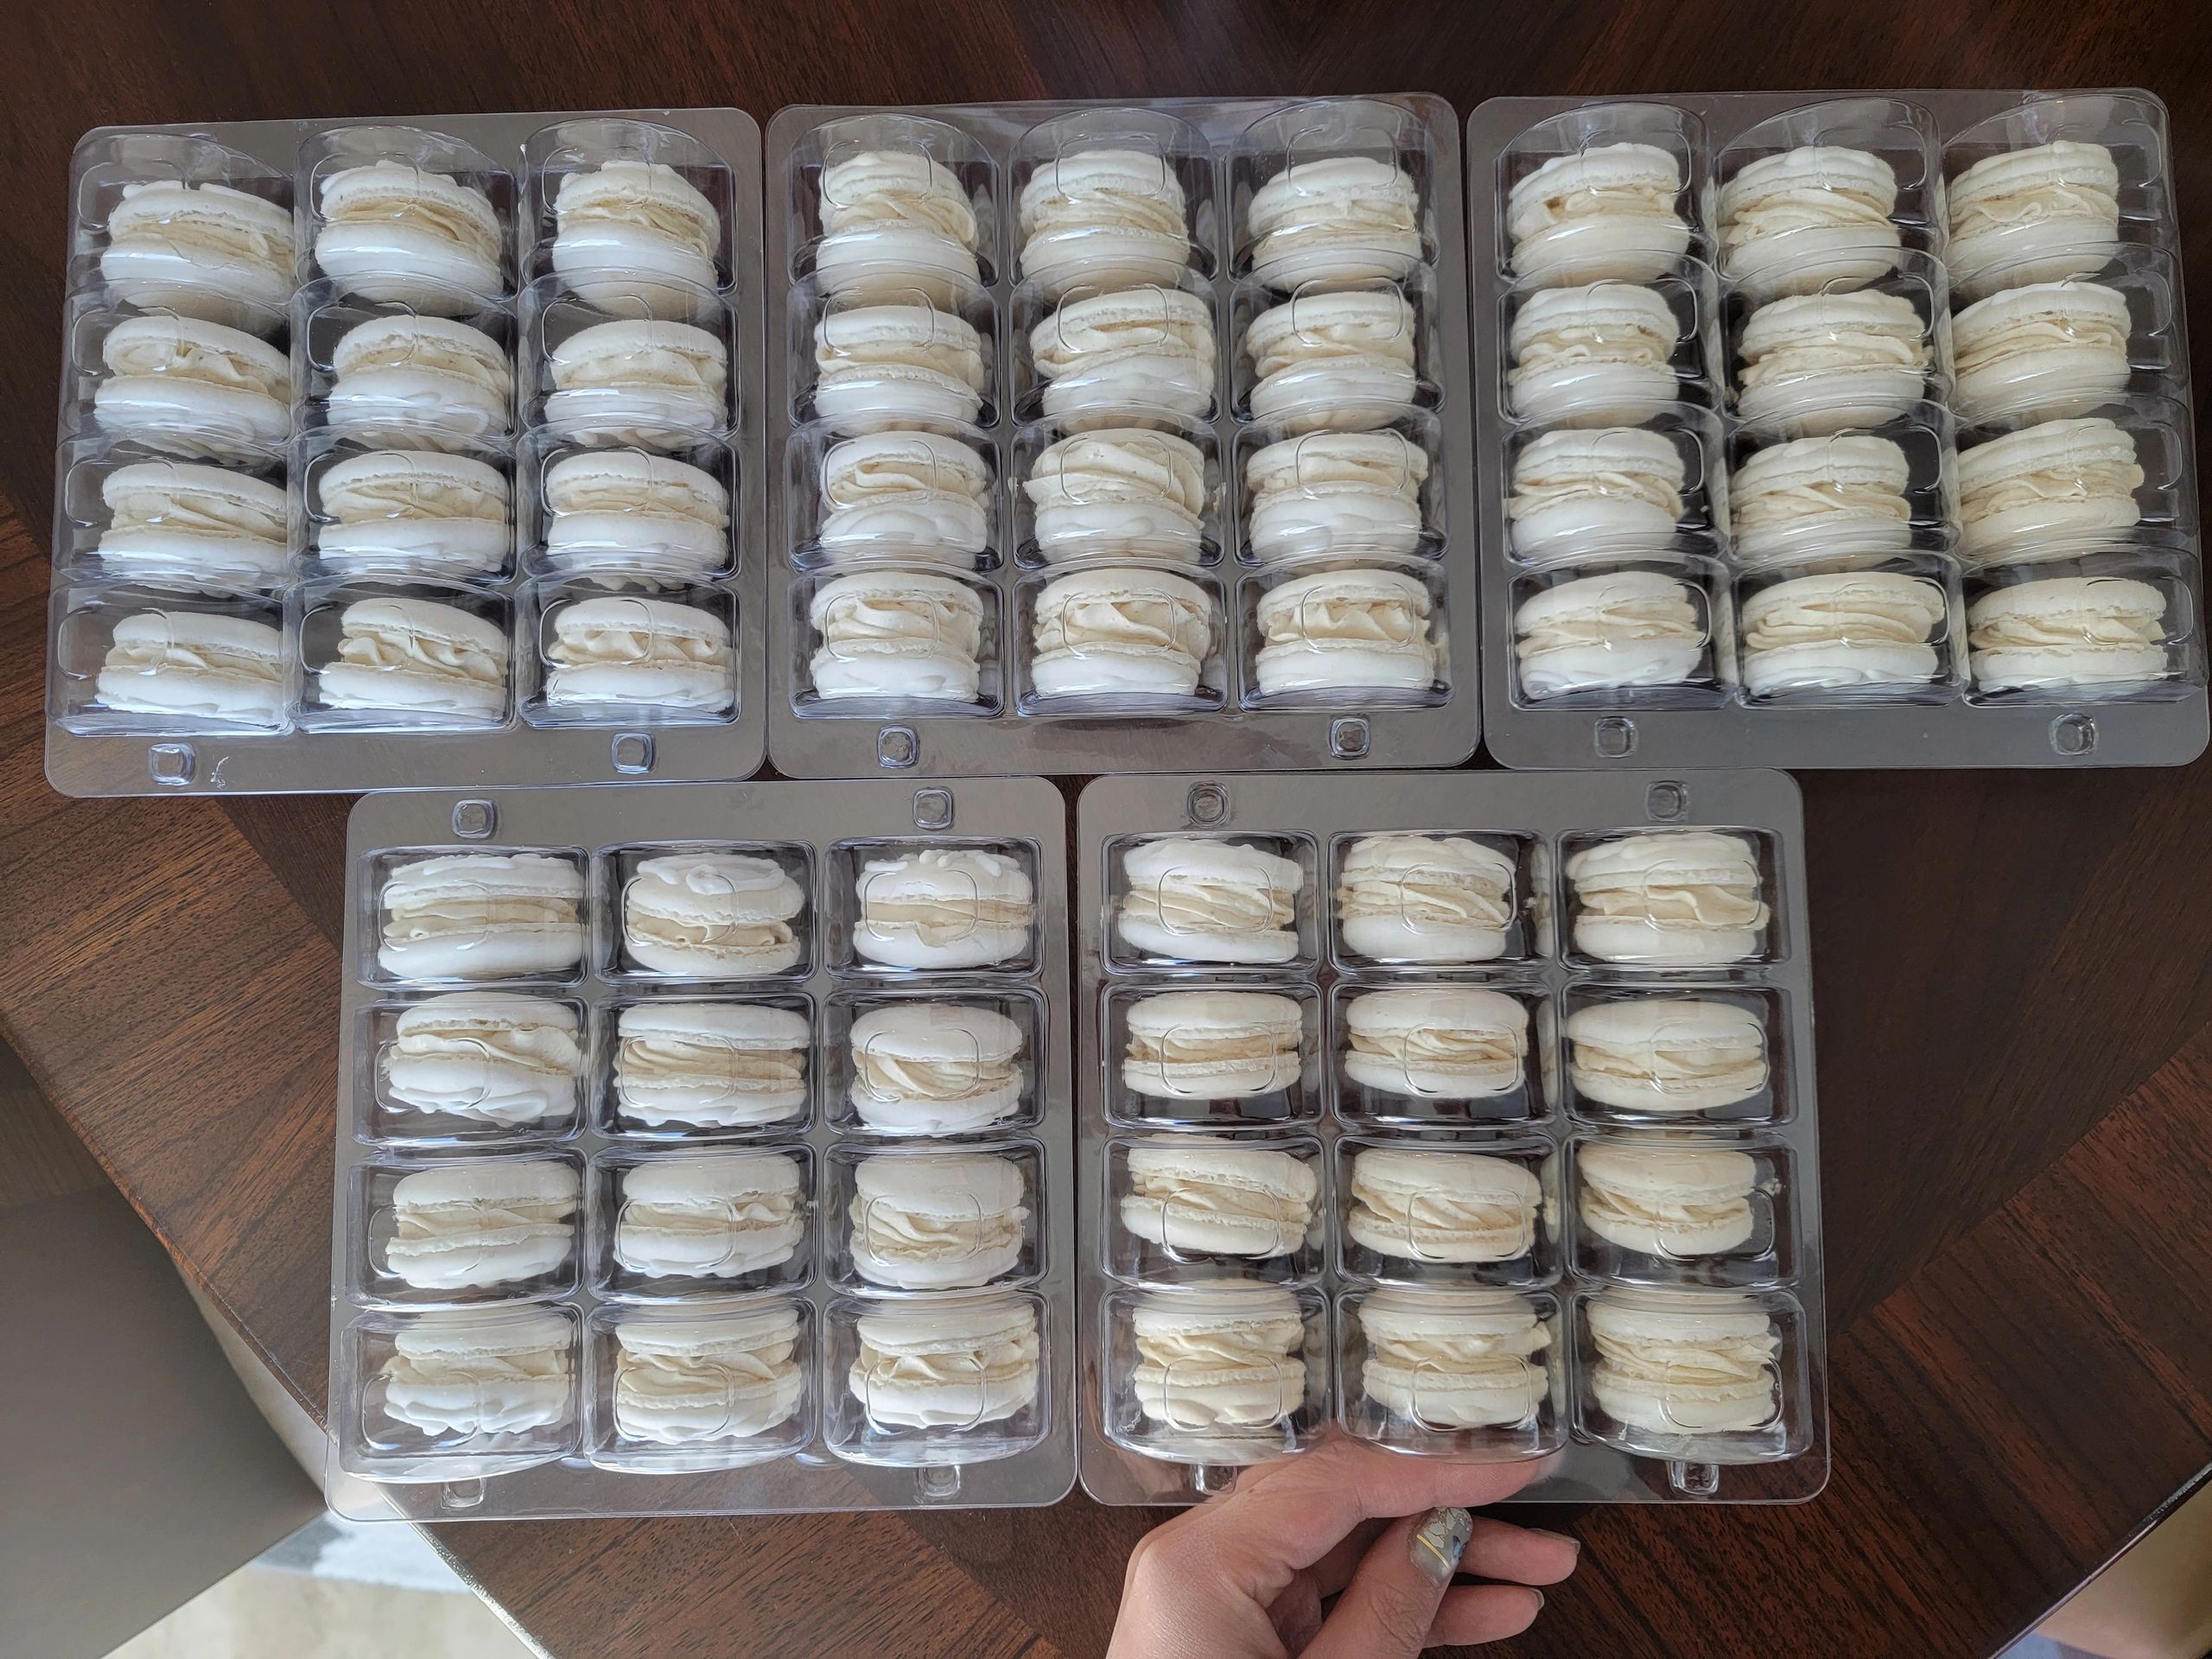 5 dozen white coconut macaron order in clamshell containers